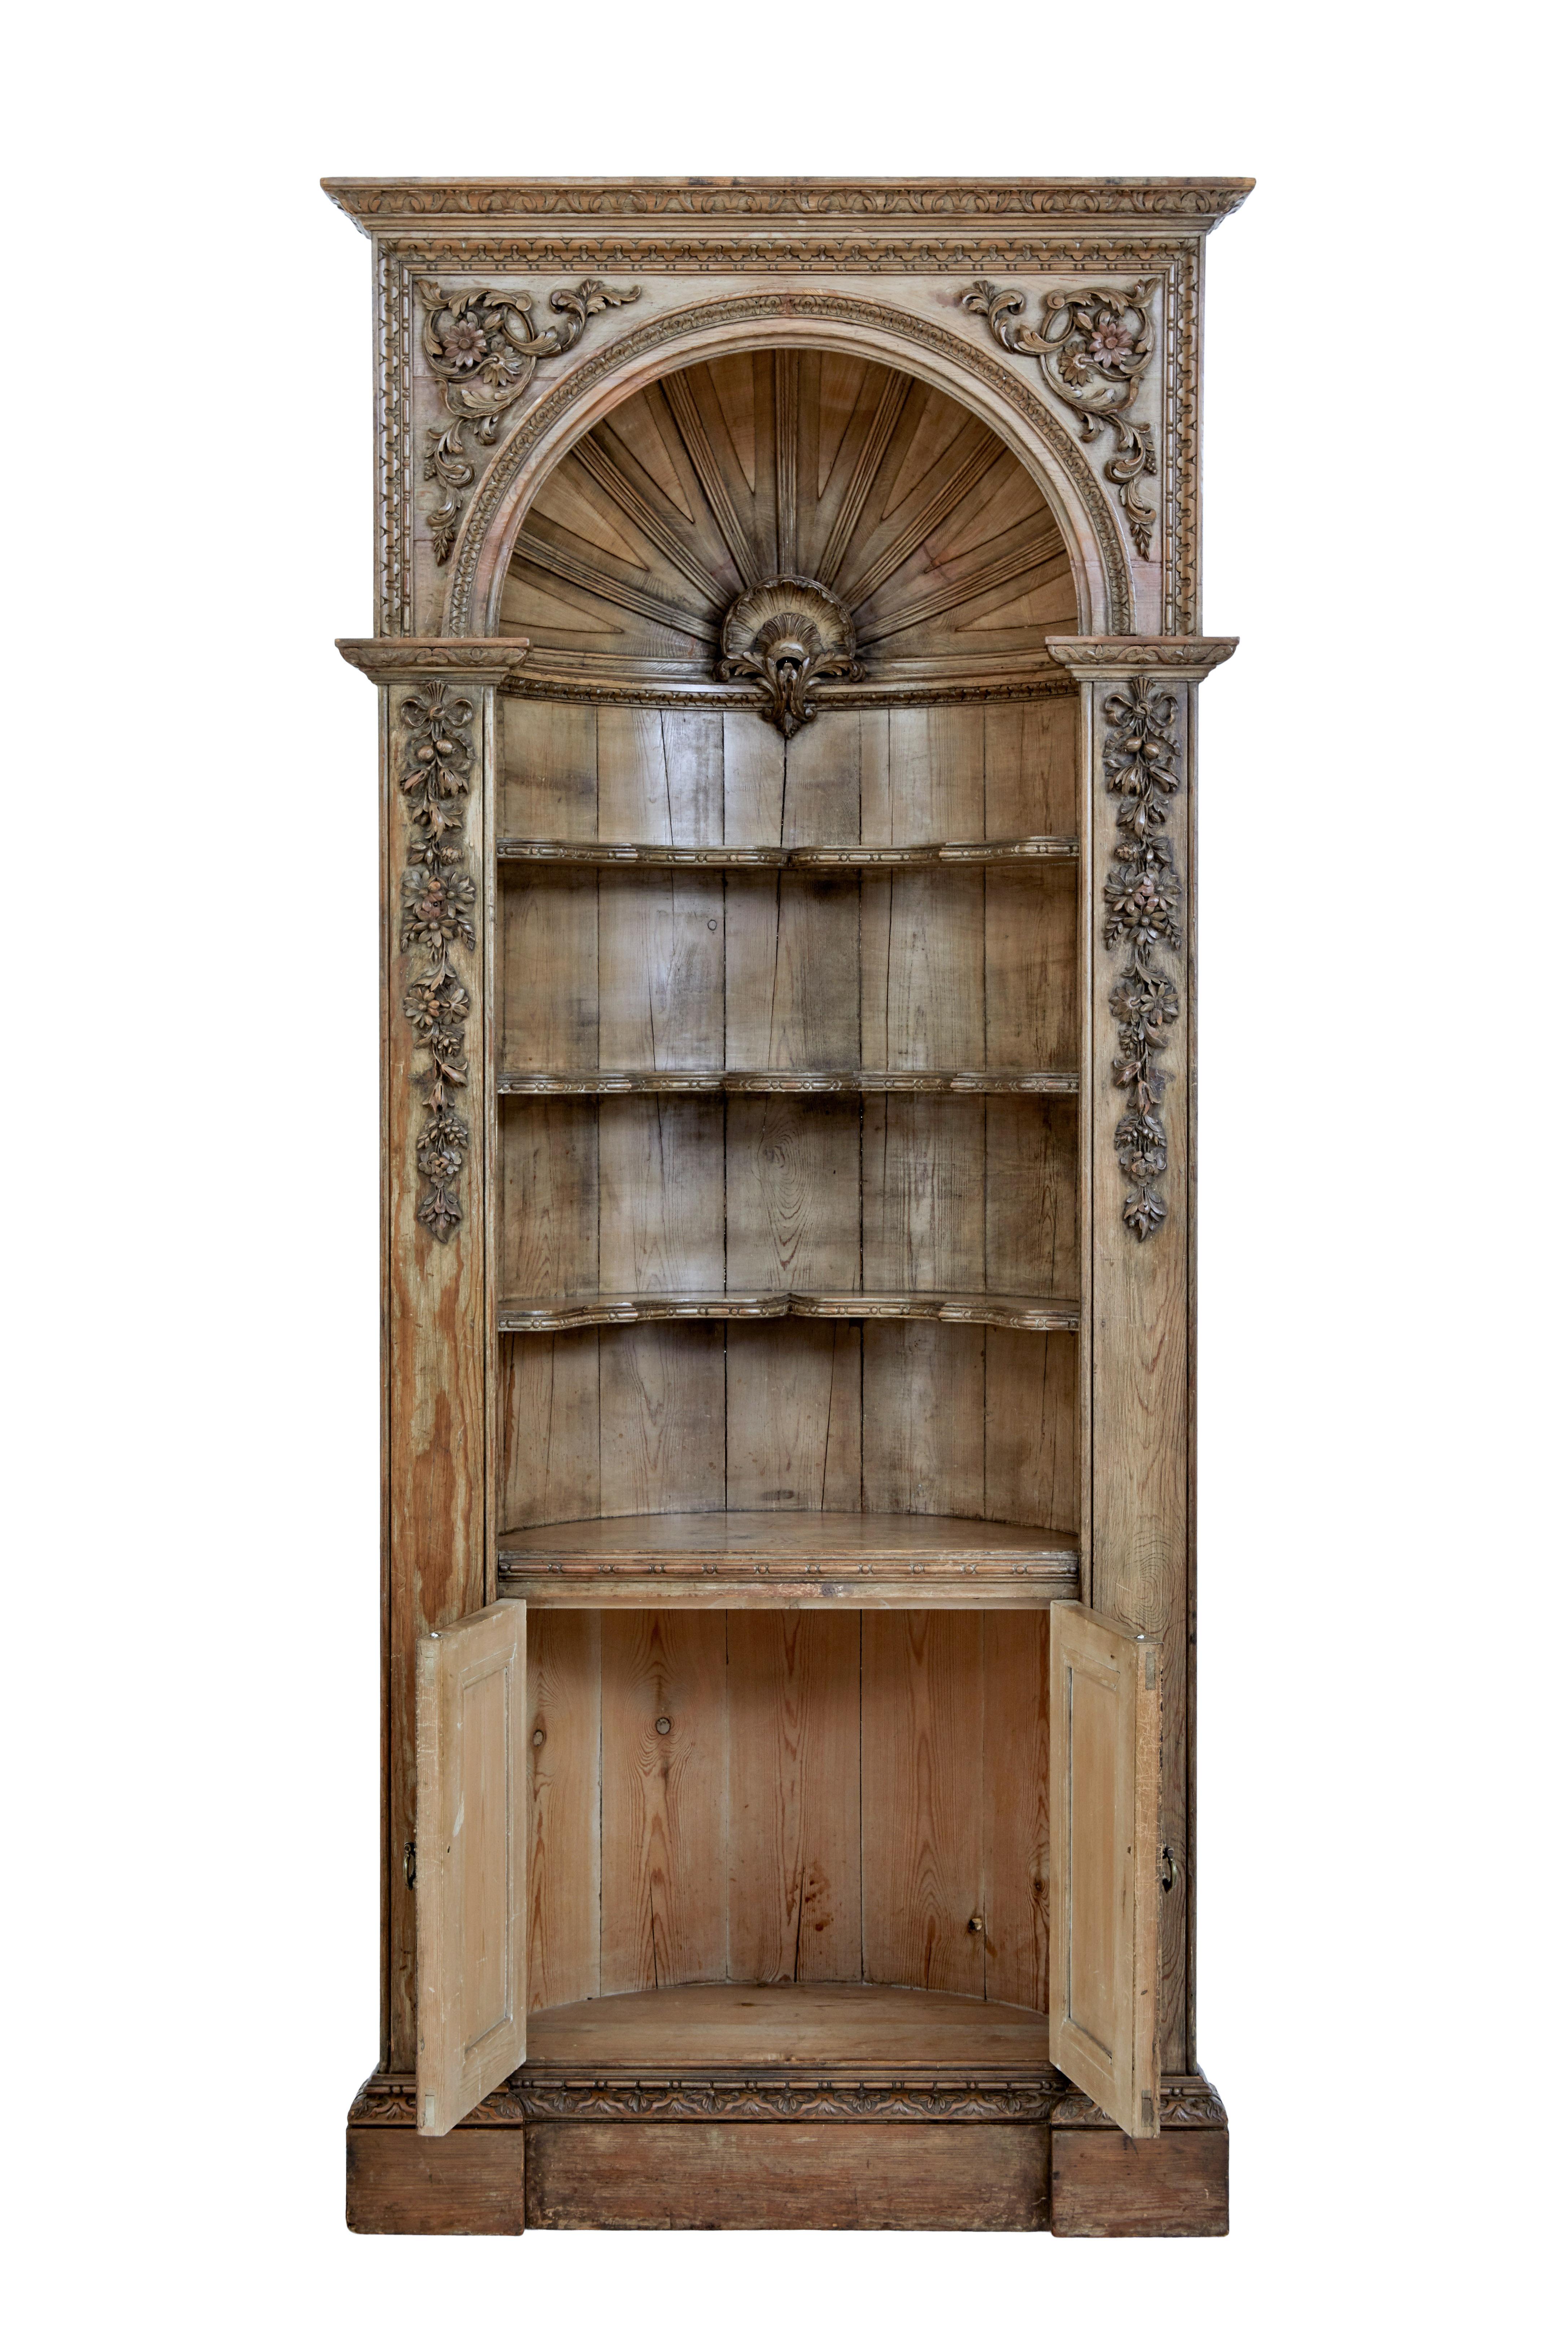 Fine quality English mid-18th century carved pine dome top fitted cabinet, circa 1760.

Excellent quality piece that would have been fitted into a wall recess, with the outer frame flush to the wall.

Architectural carved cornice, decorated with